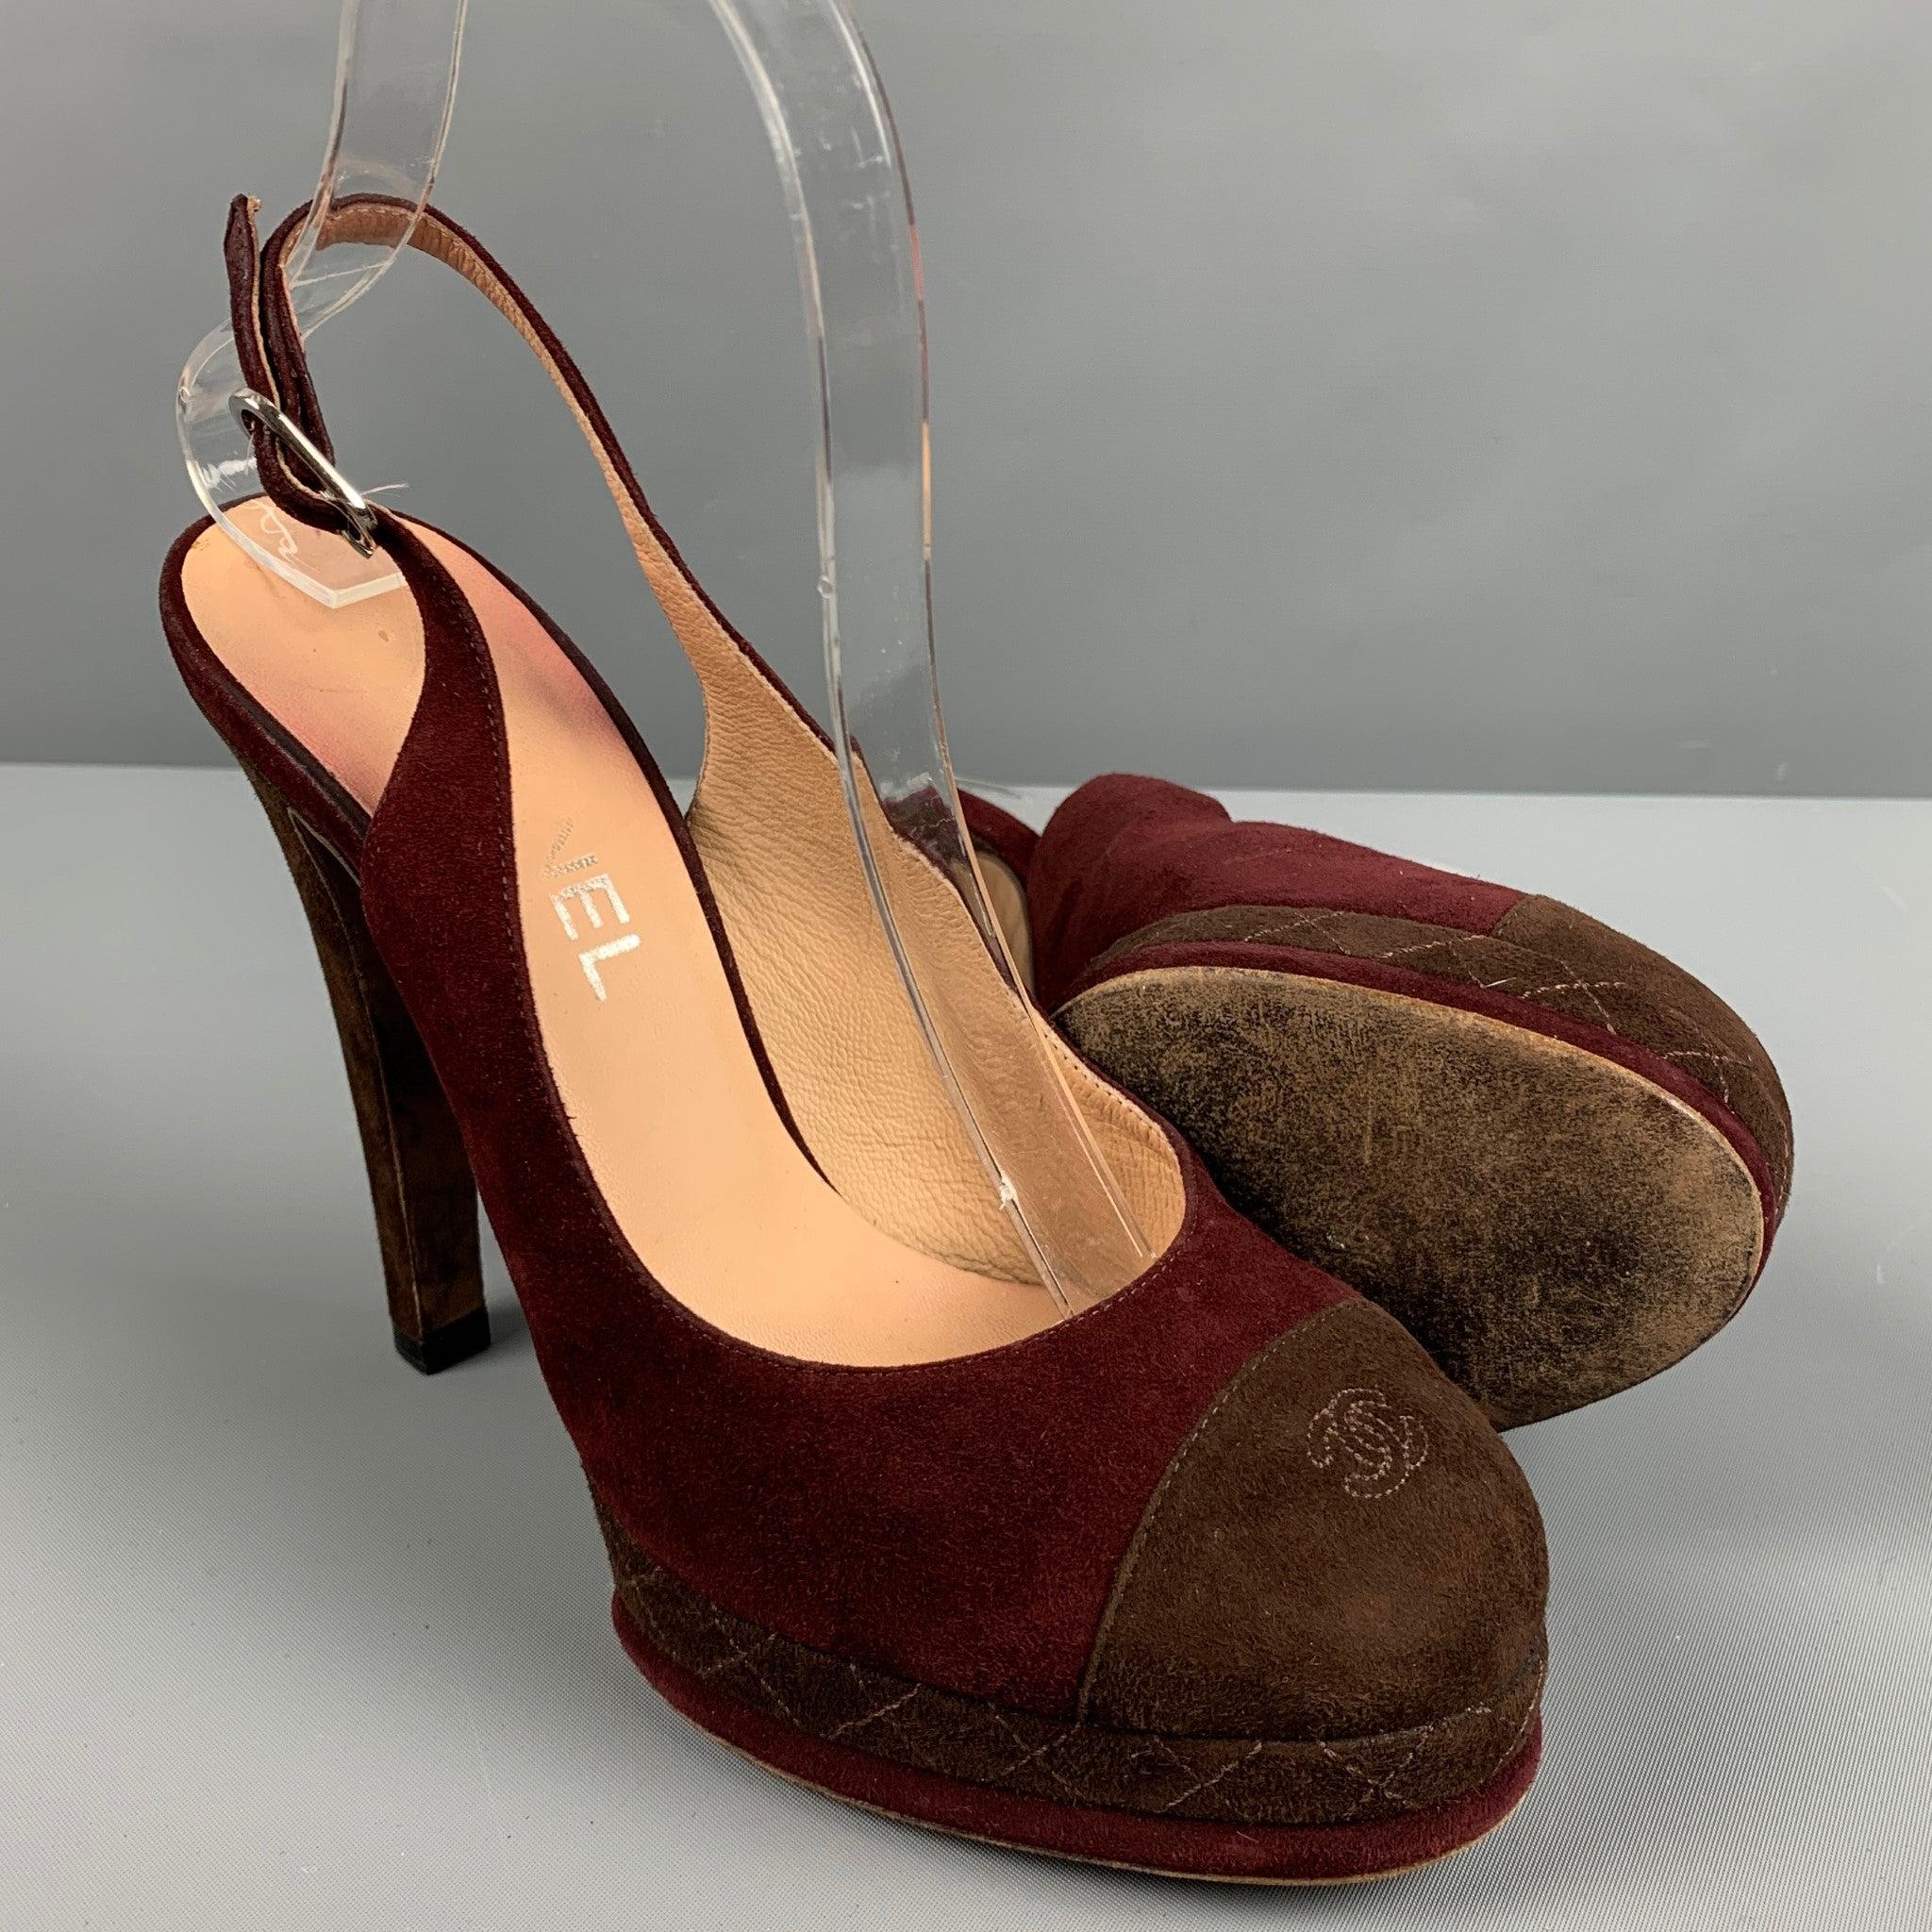 CHANEL Size 7.5 Burgundy Brown Suede Slingback Pumps For Sale 1